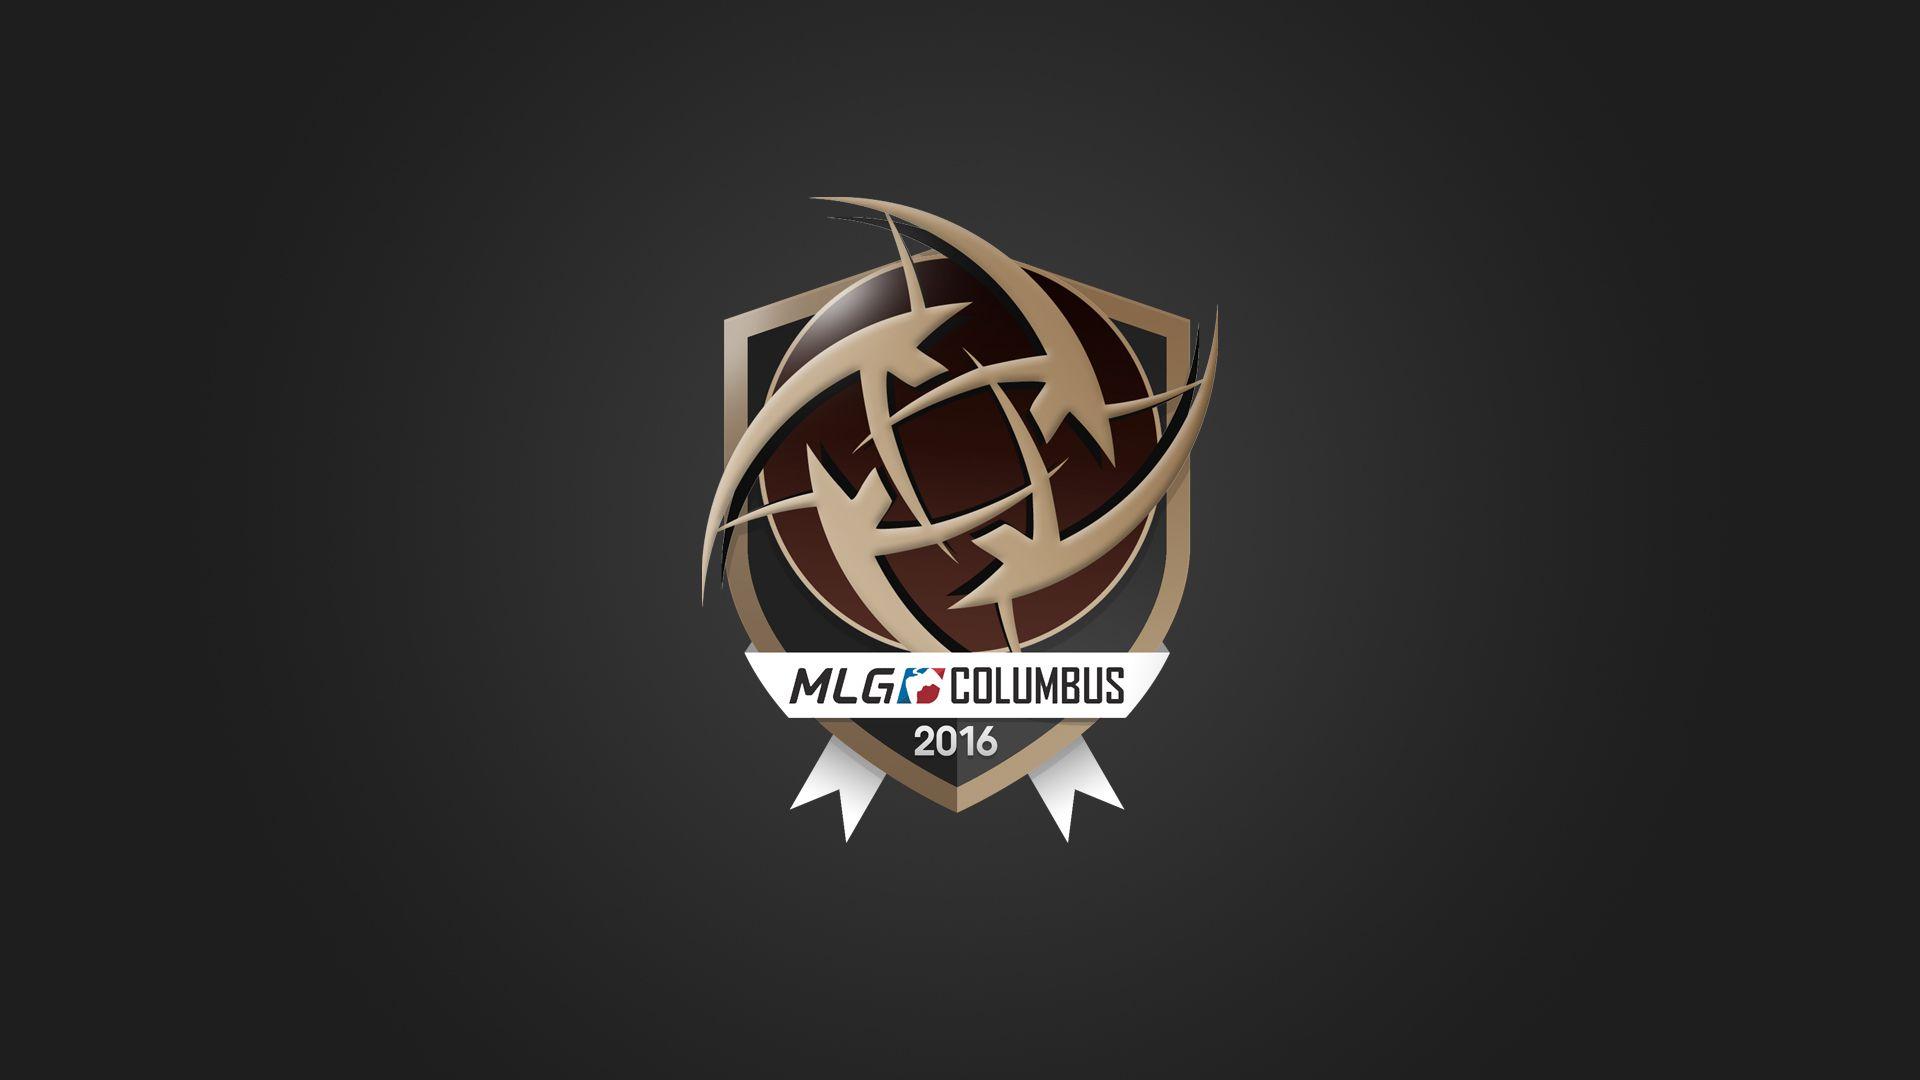 unofficial MLG Stickers you wanted as wallpaper Links in comments